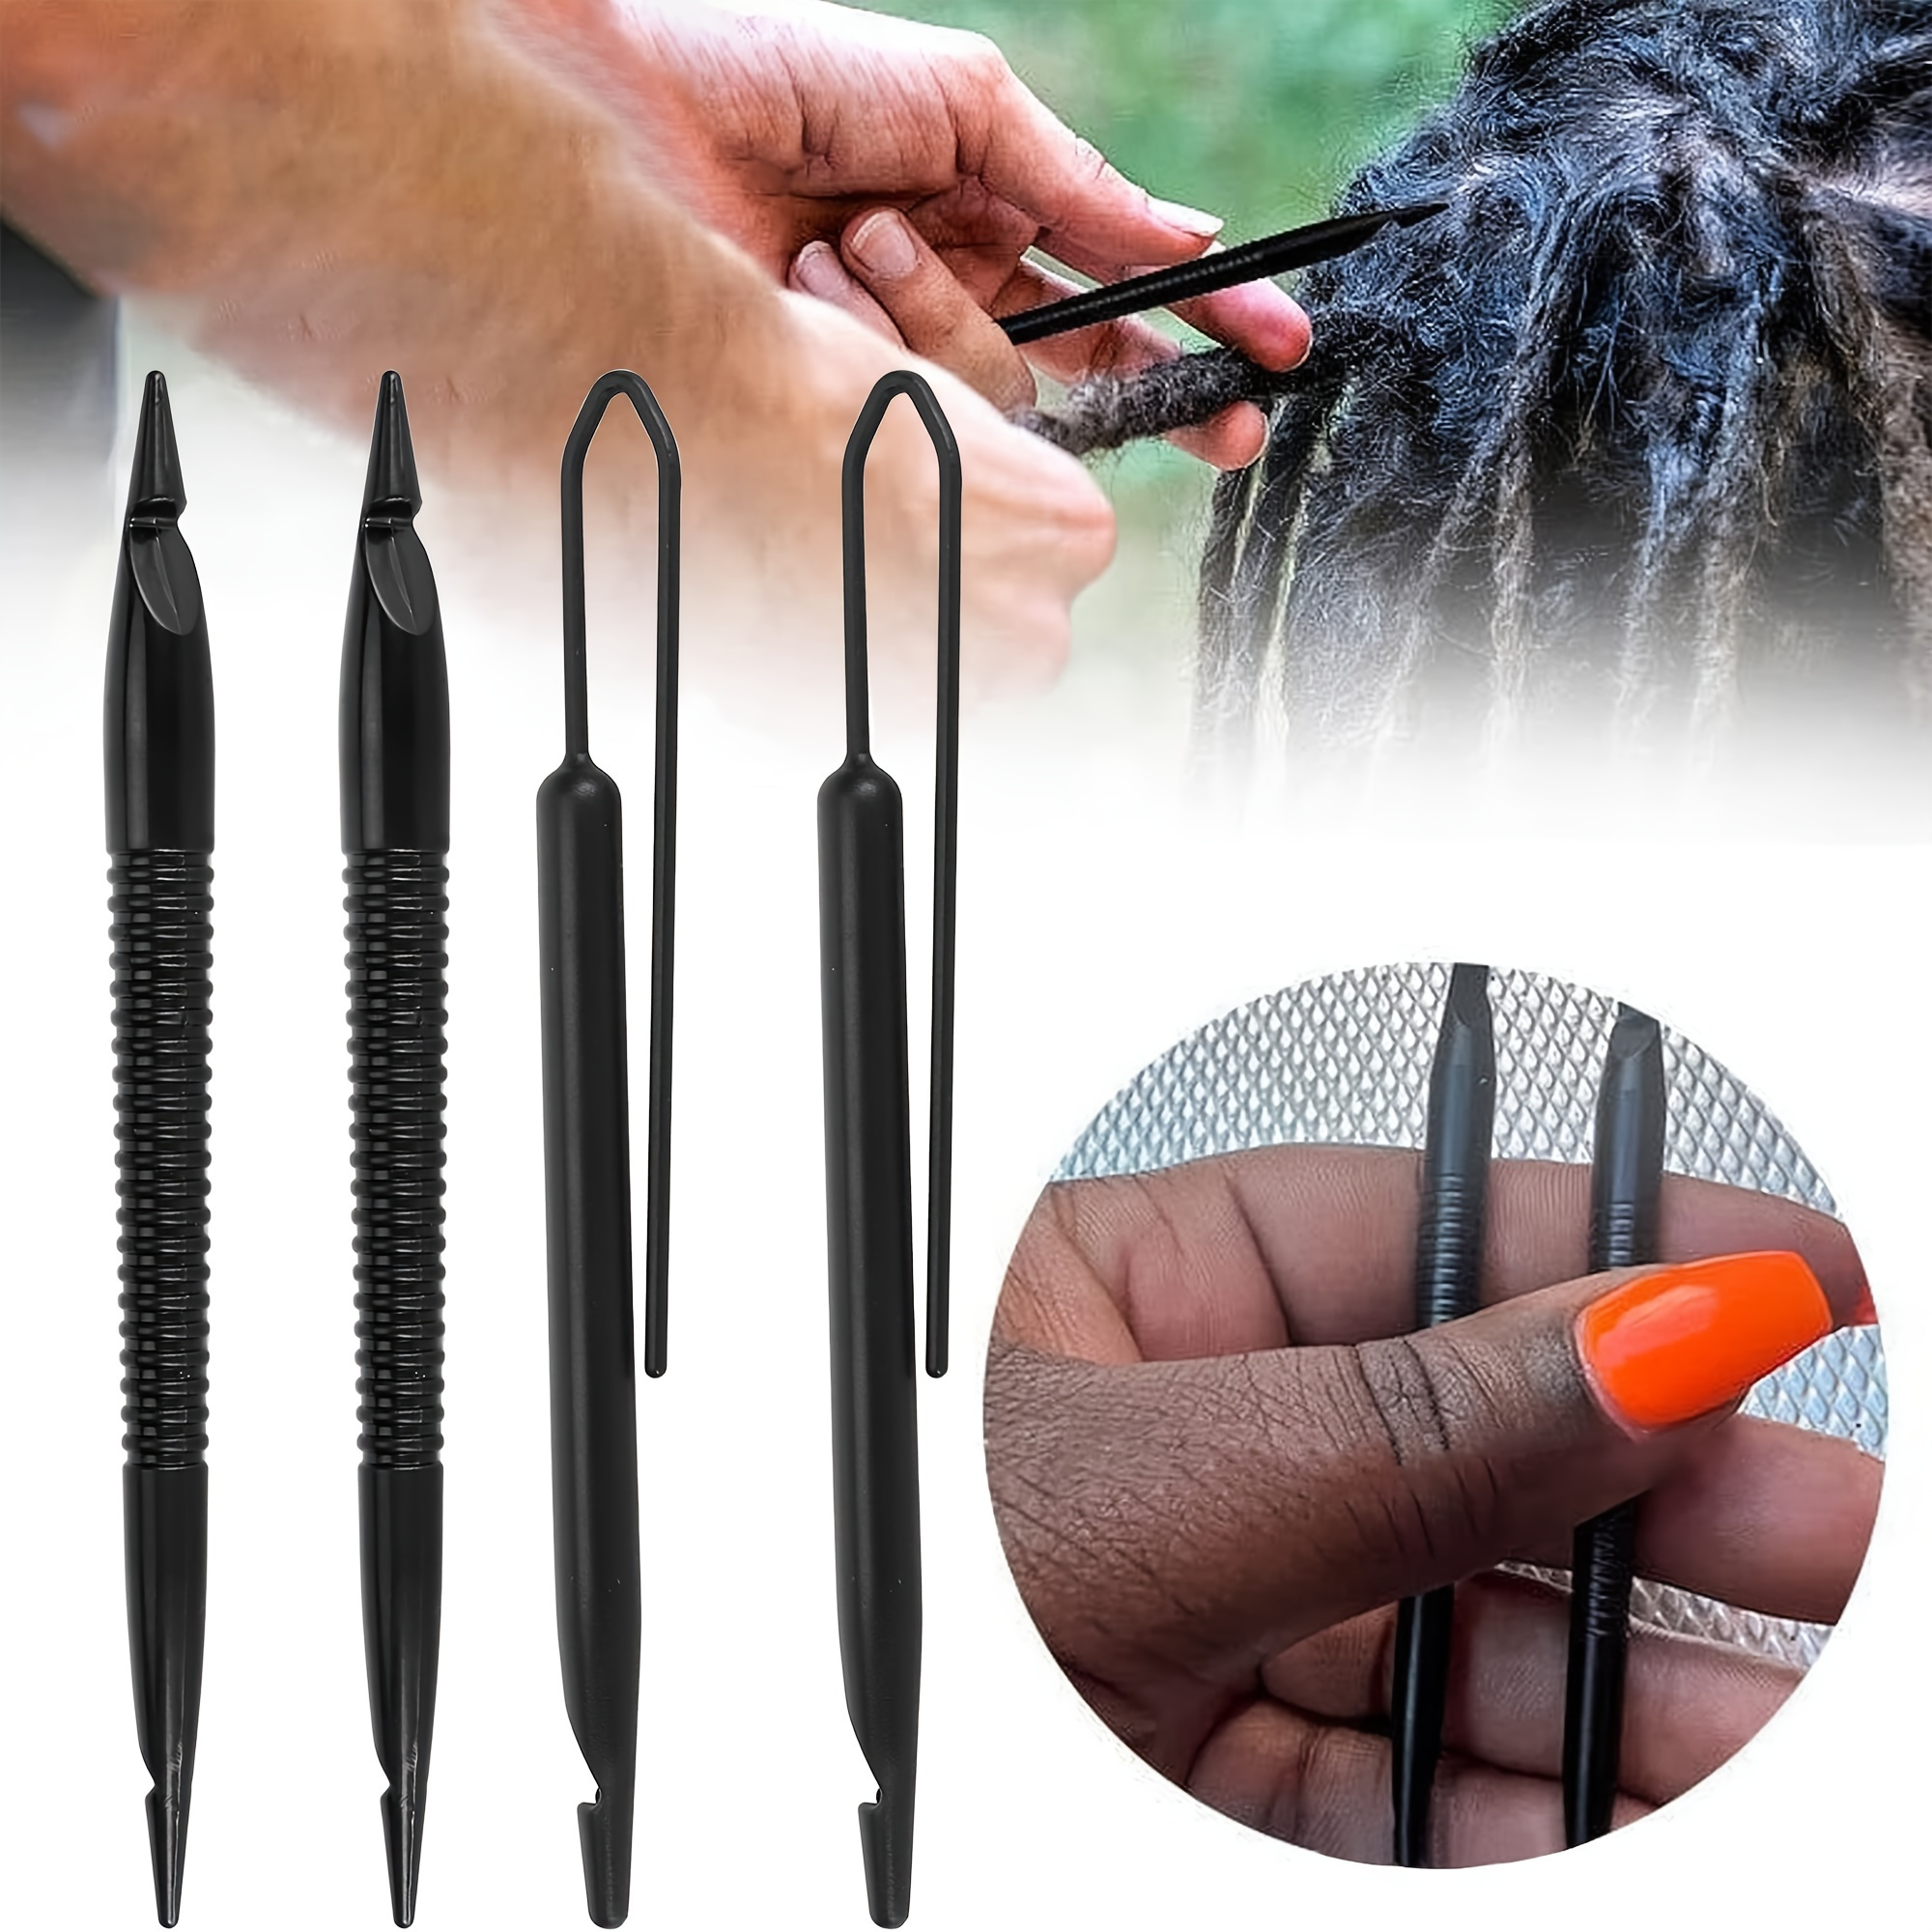  Crochet Needle Crochet Hair Tool Kit, Latch Hook Crochet Needle  with Elastic Rubber Bands for Hair Colorful and Black Hair Tie, Alligator  Hair Clips 5 Pcs, Crochet Braids Hair Tool for